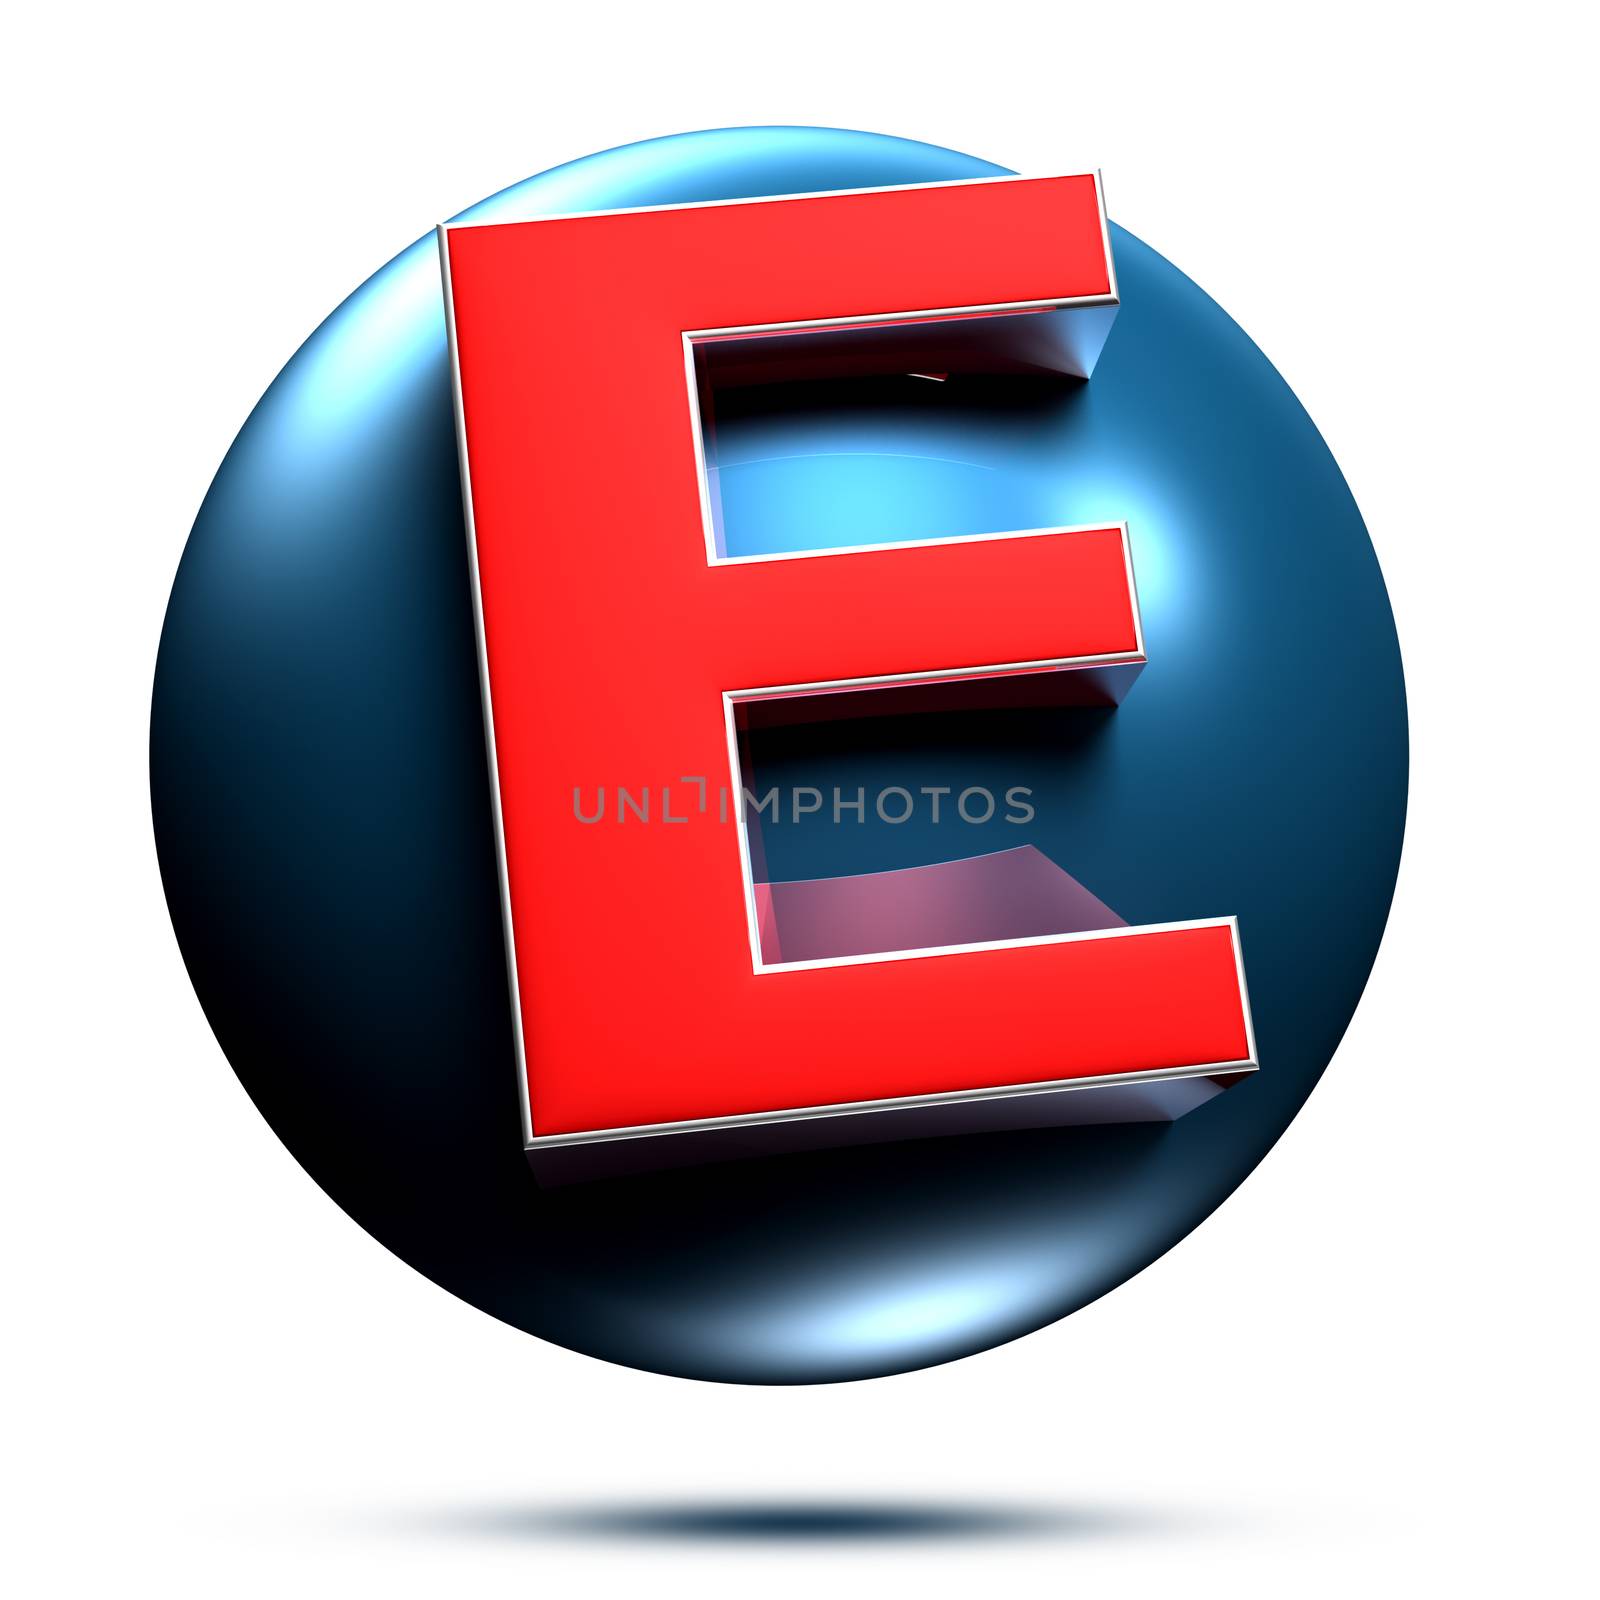 E logo isolated on white background illustration 3D rendering with clipping path.